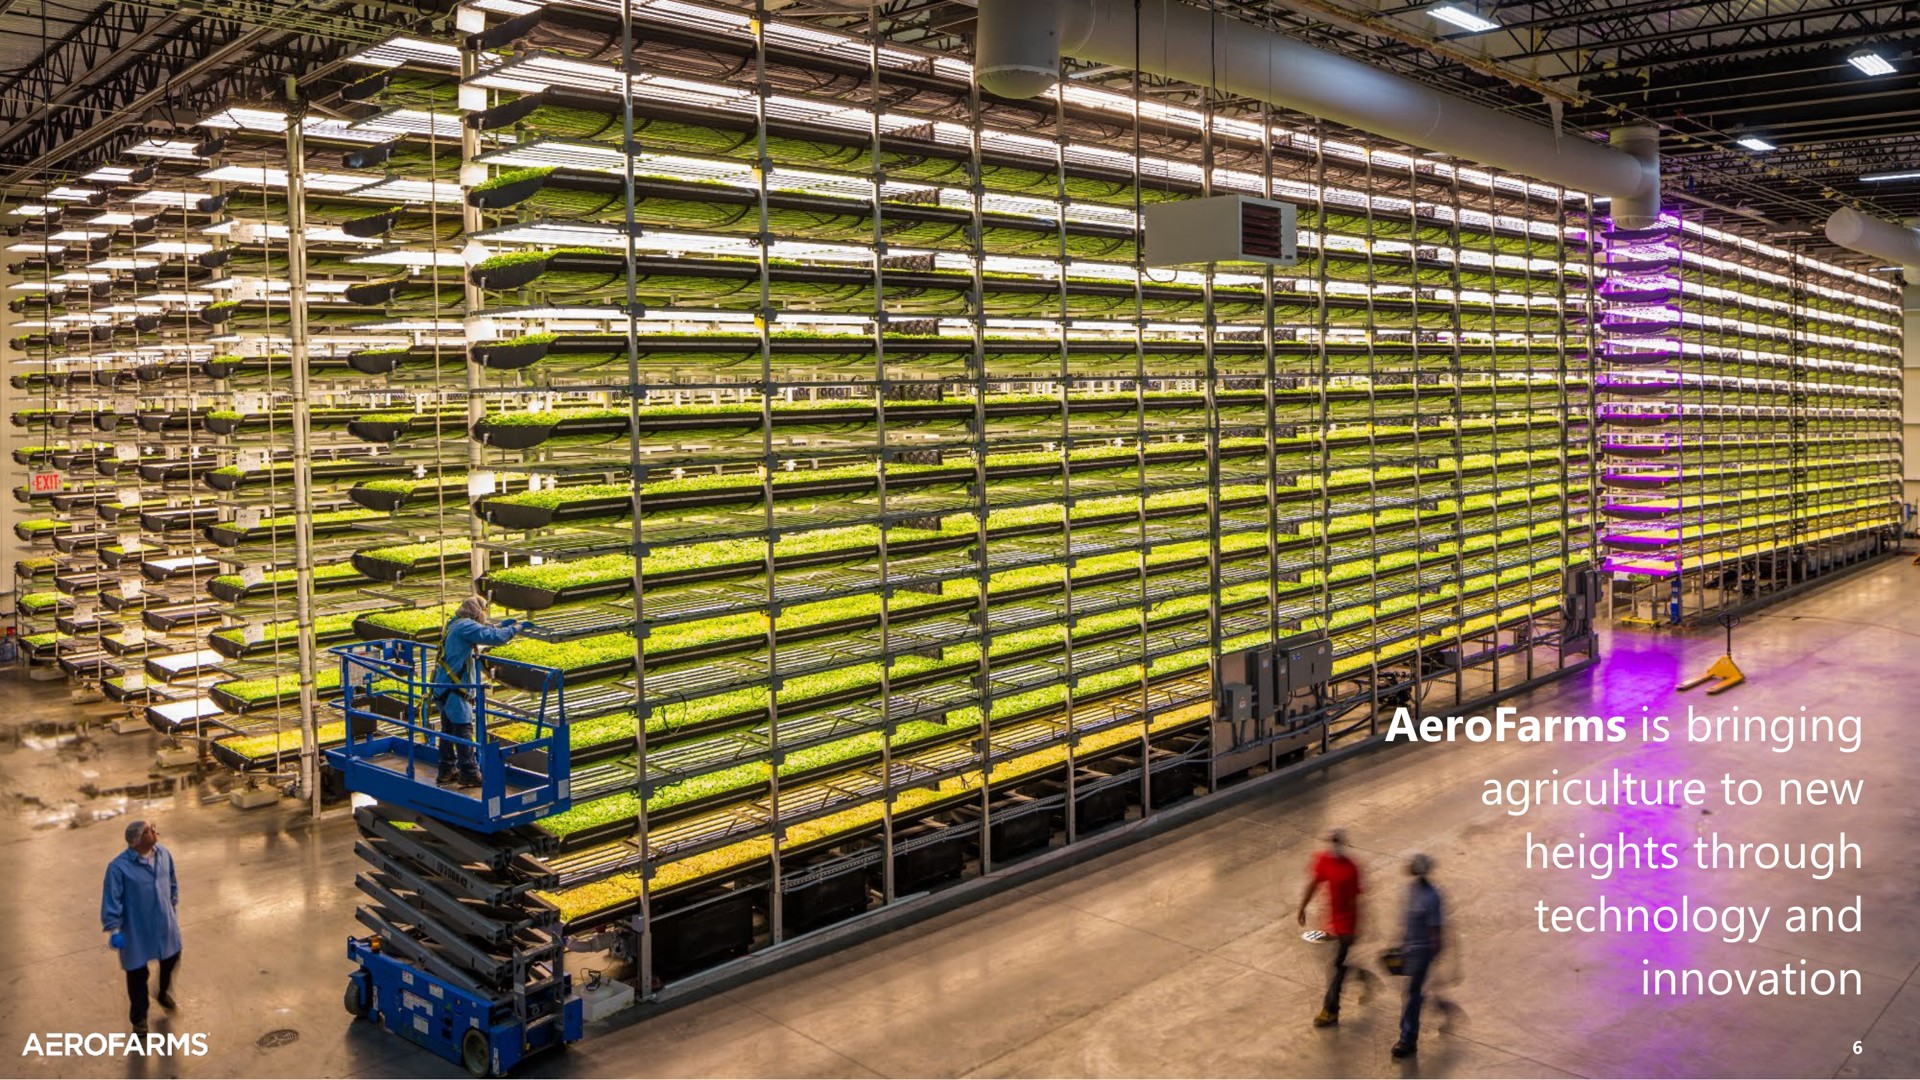 is bringing agriculture to new heights through technology and innovation | AeroFarms